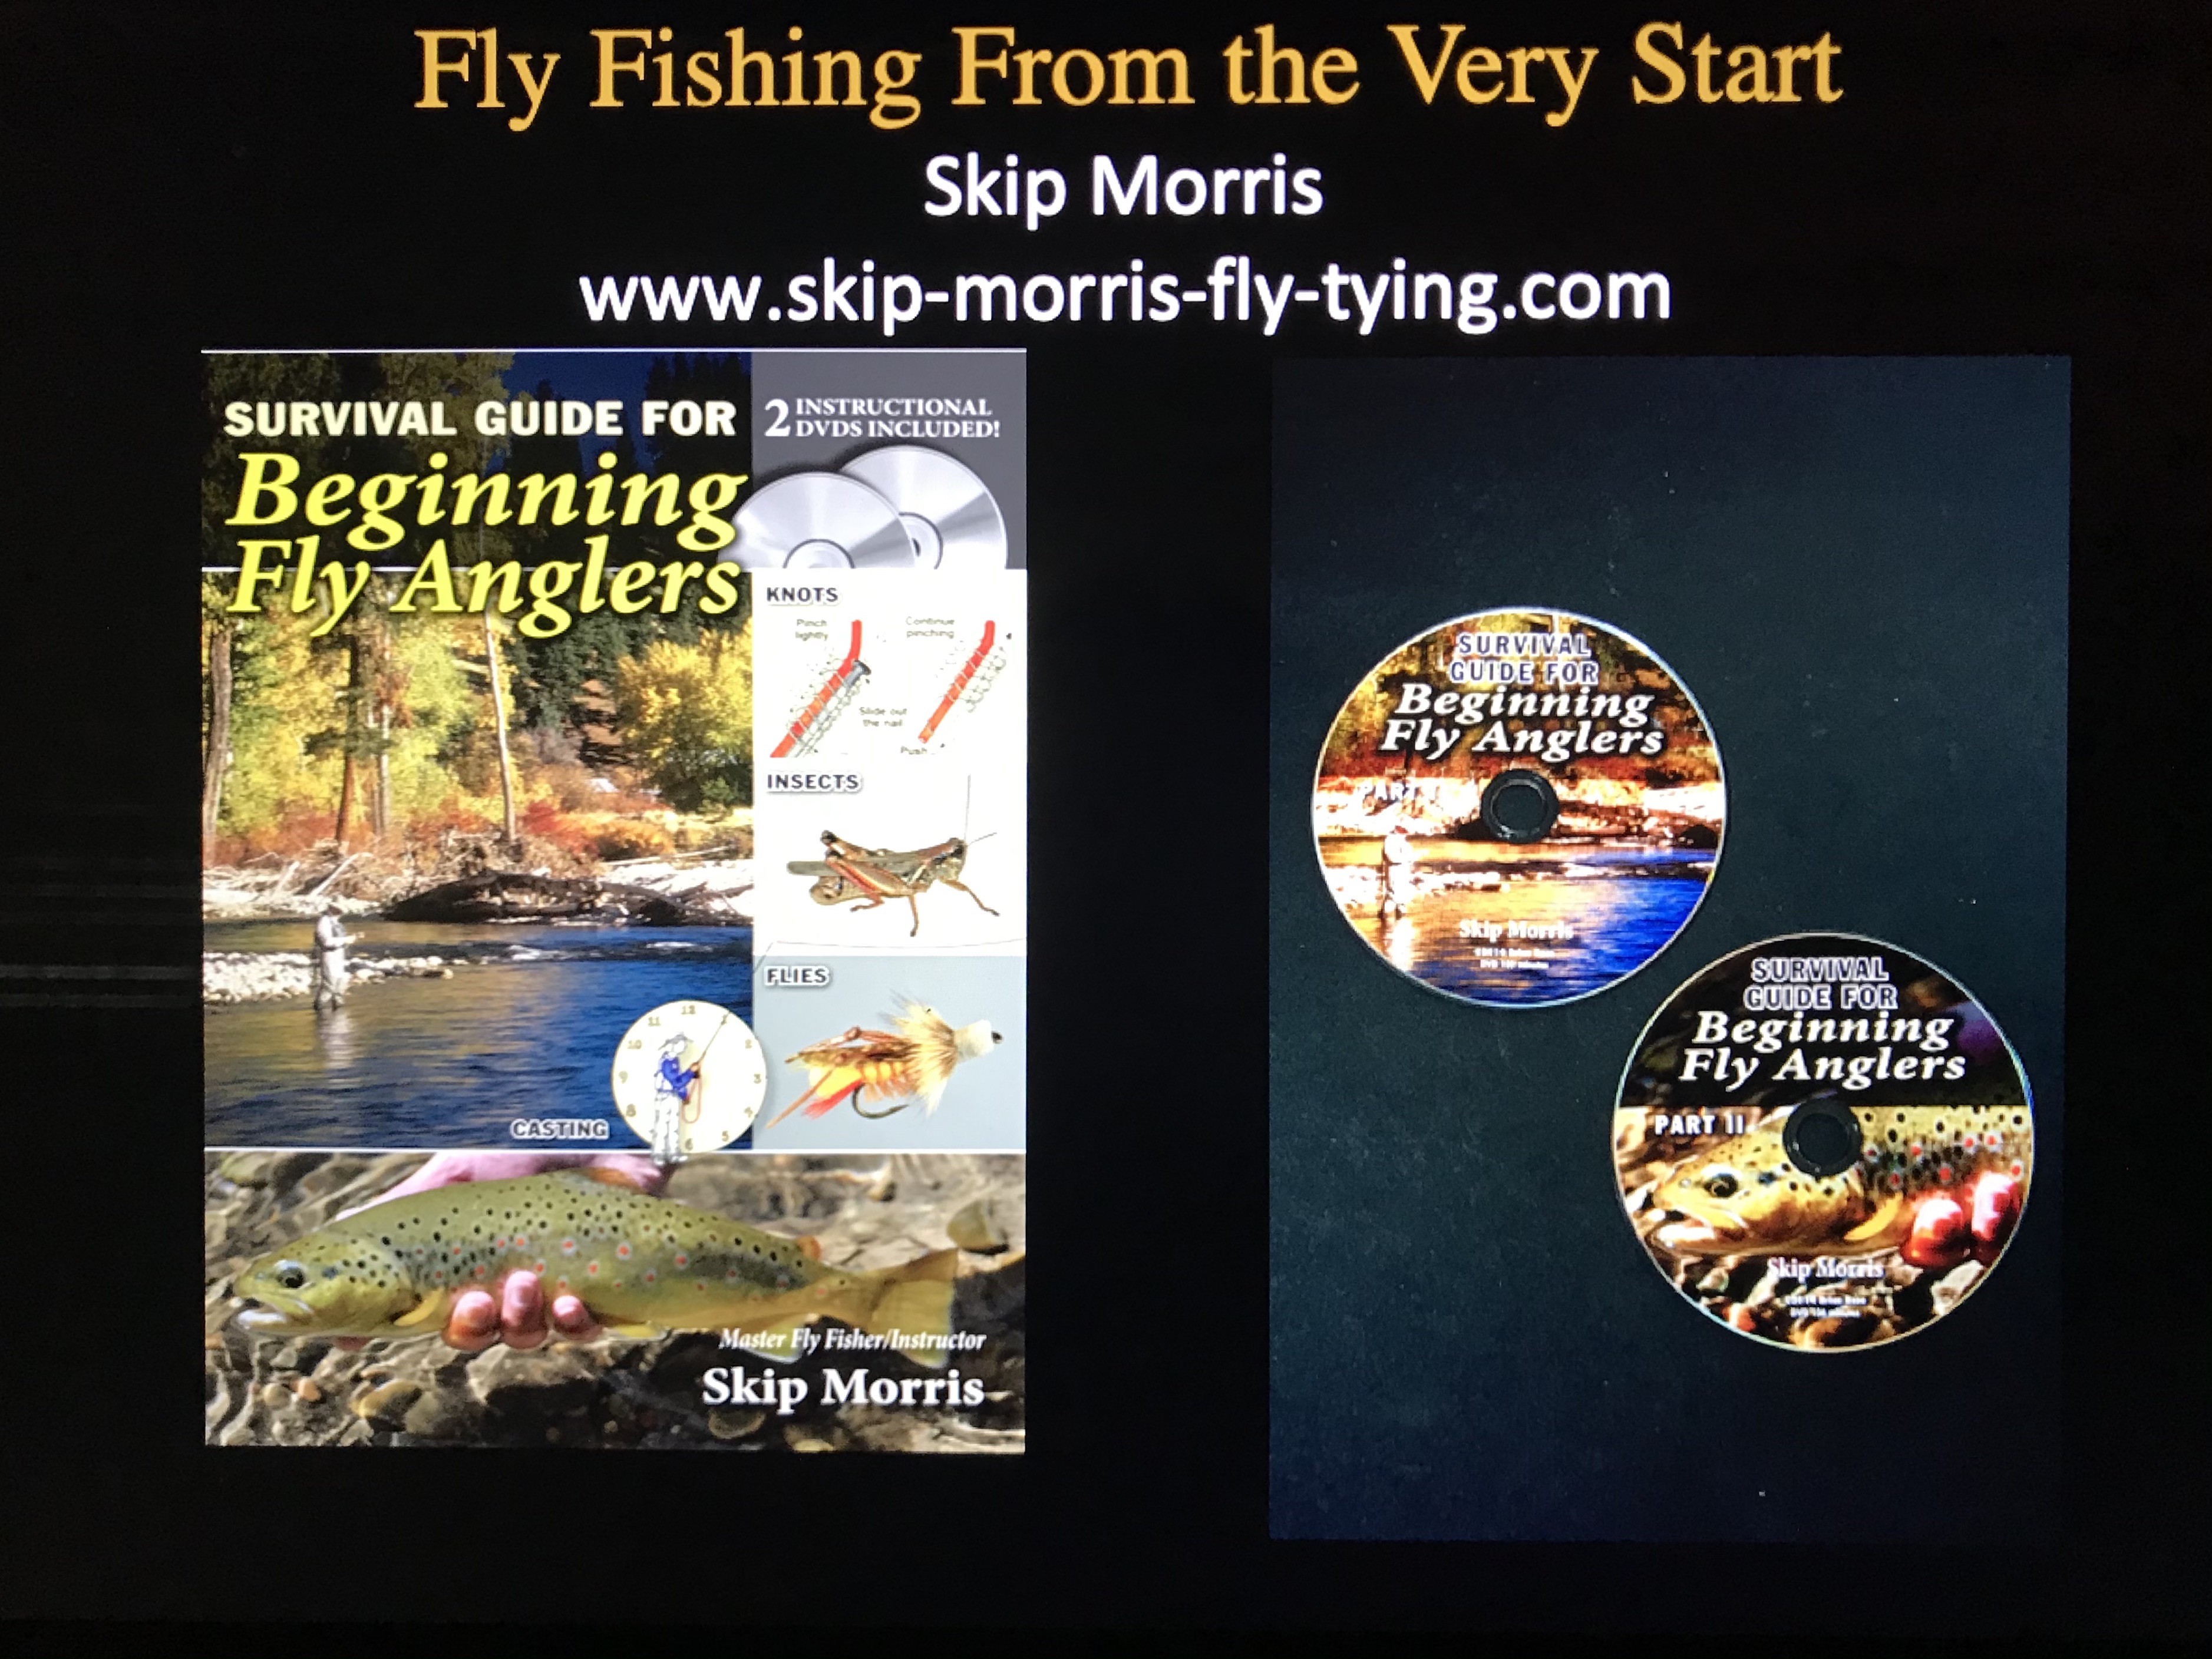 Fly Fishing Photography interview with Carol Ann Morris